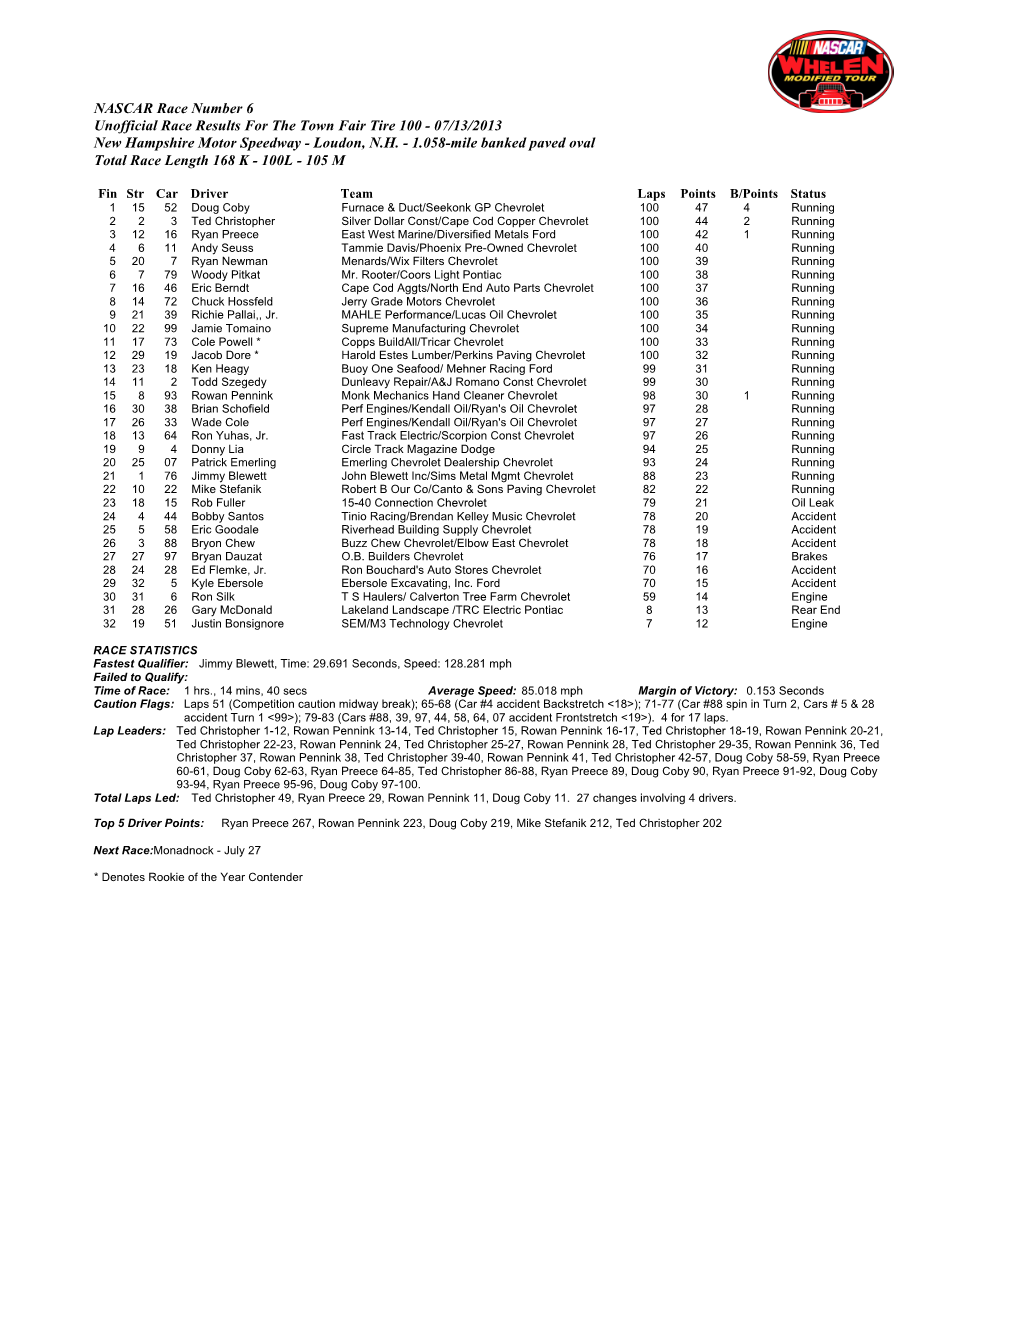 NASCAR Race Number 6 Unofficial Race Results for the Town Fair Tire 100 - 07/13/2013 New Hampshire Motor Speedway - Loudon, N.H